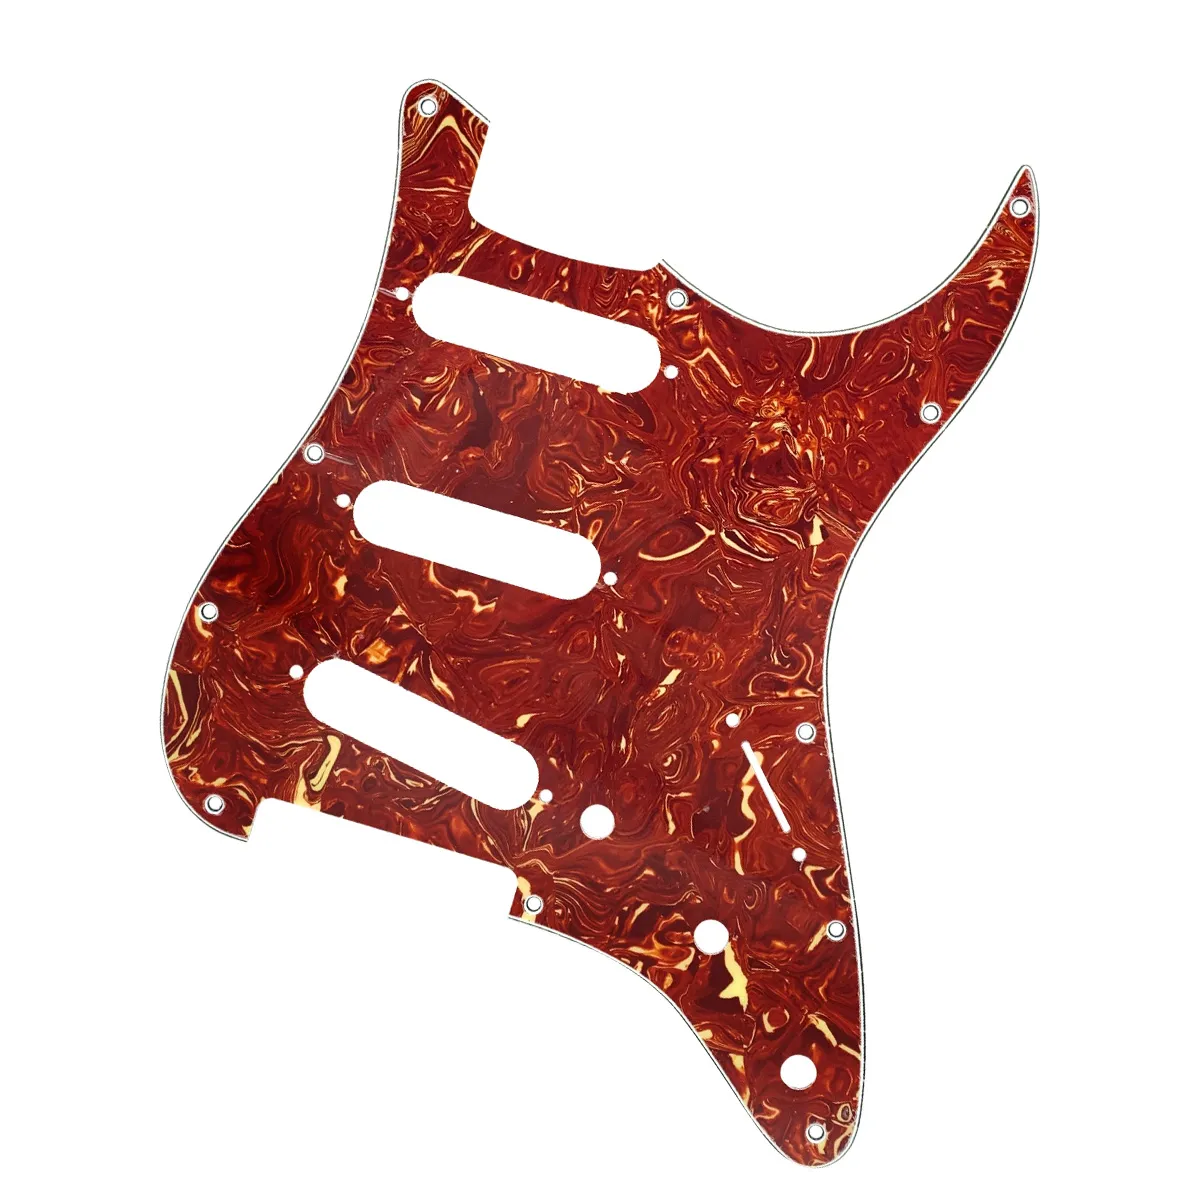 SSS Tortoise Shell Pickguard 11 Hole 4Ply Scratch Plate With Back Plate Screws Electric Guitar Parts